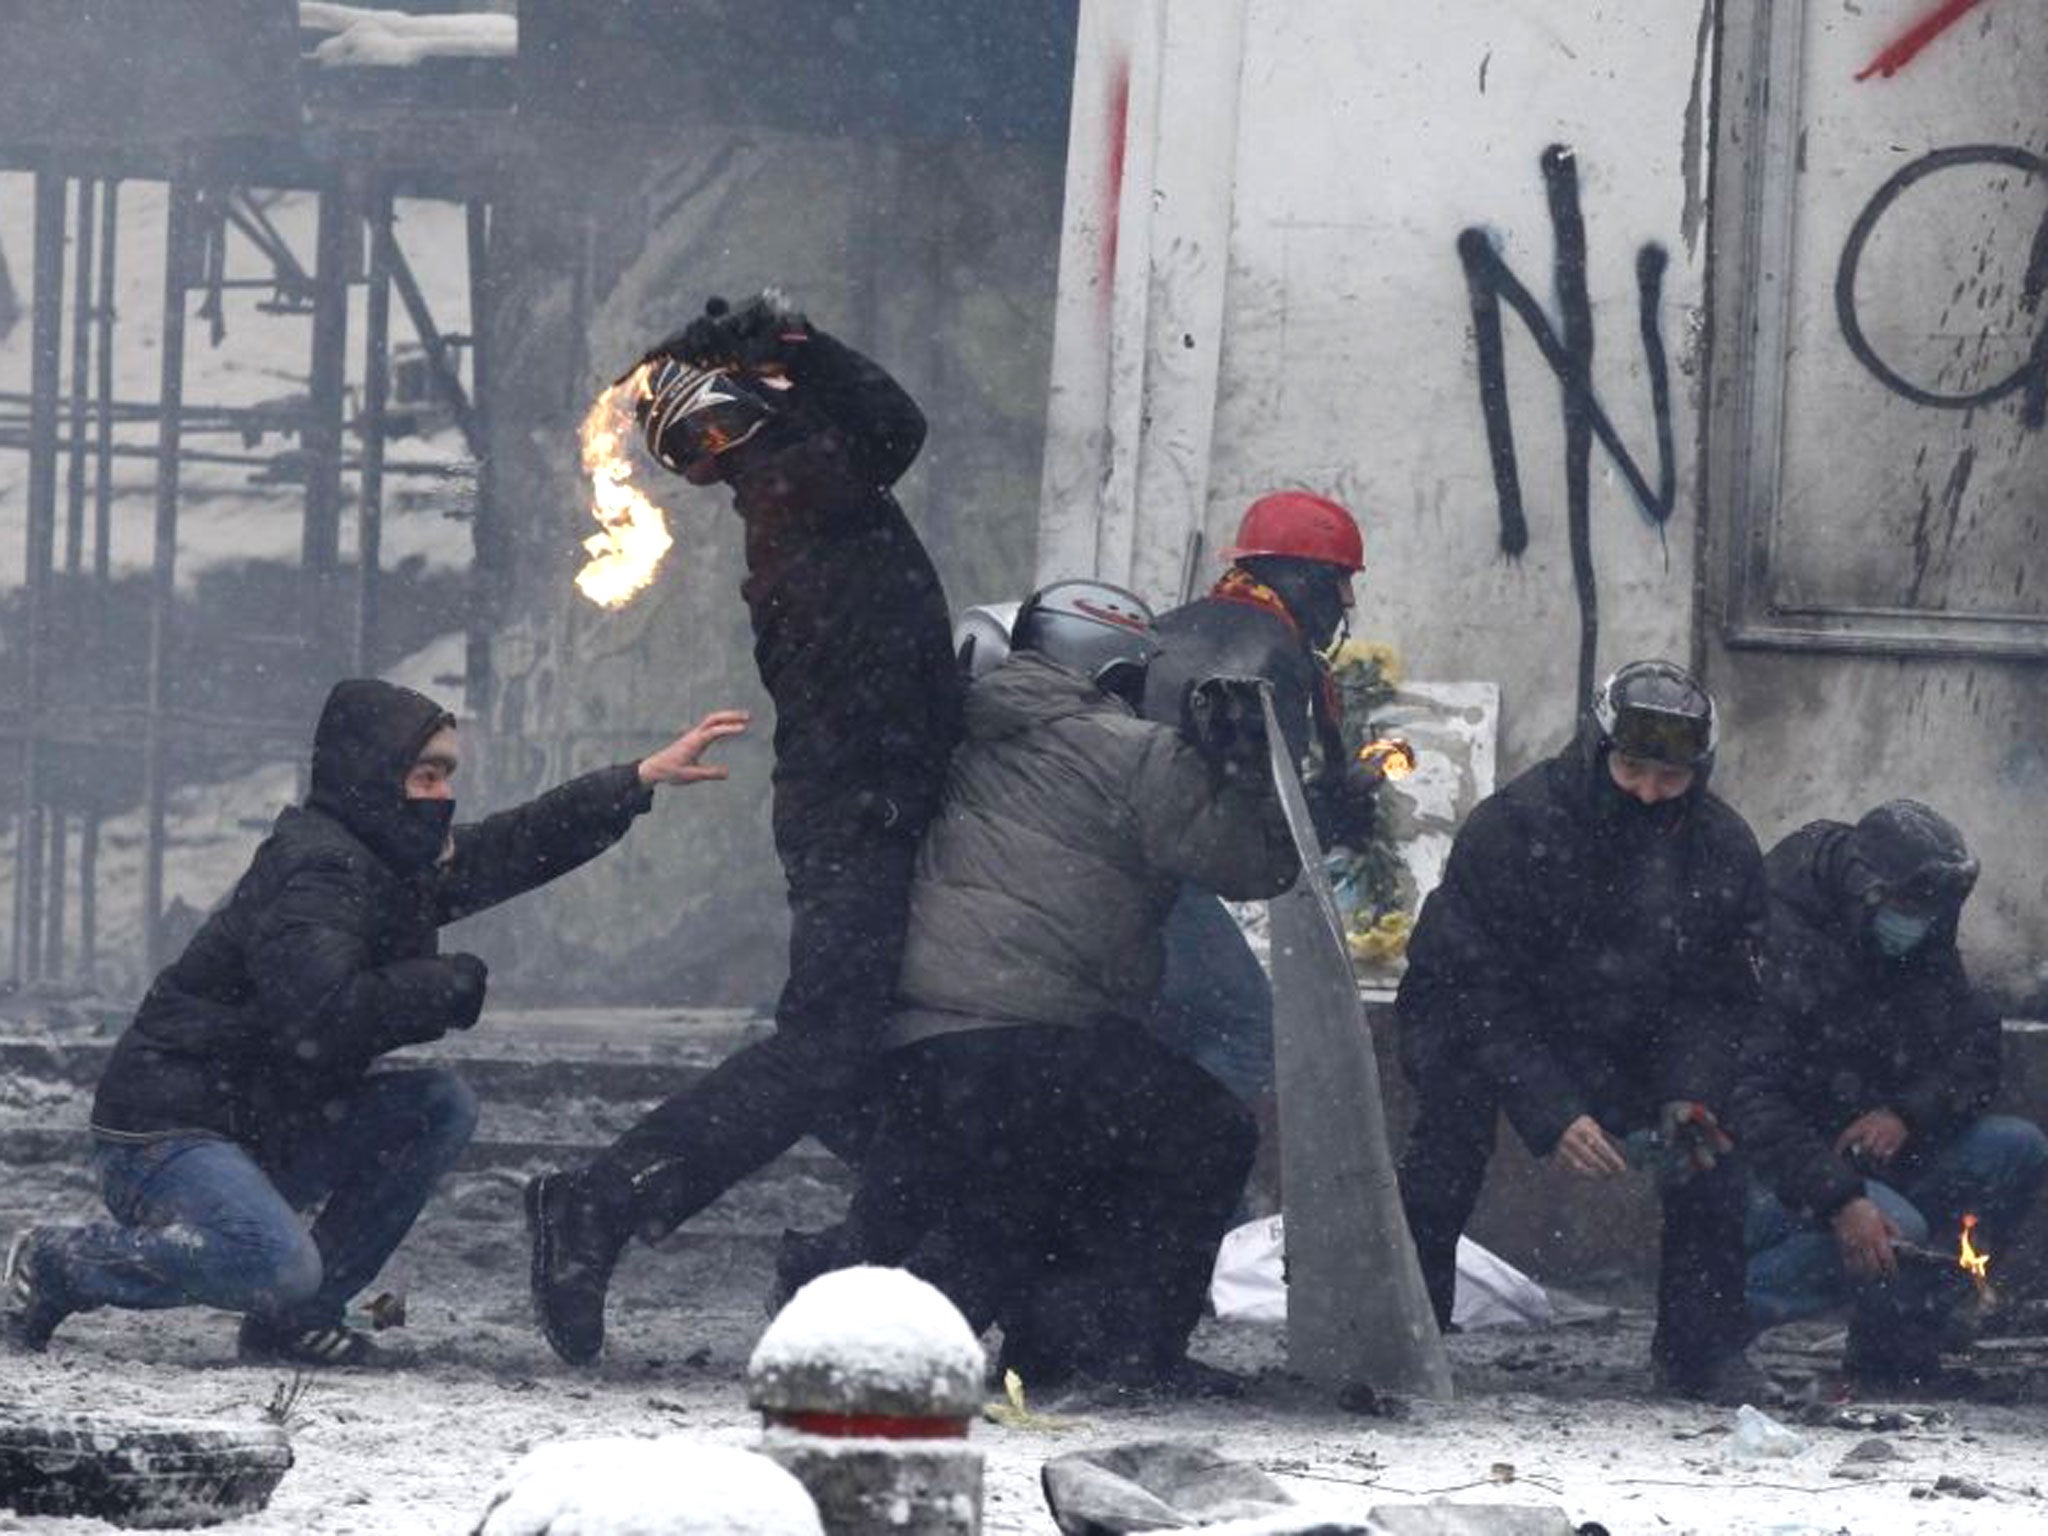 A pro-European protester throws a Molotov cocktail towards riot police during clashes in Kiev